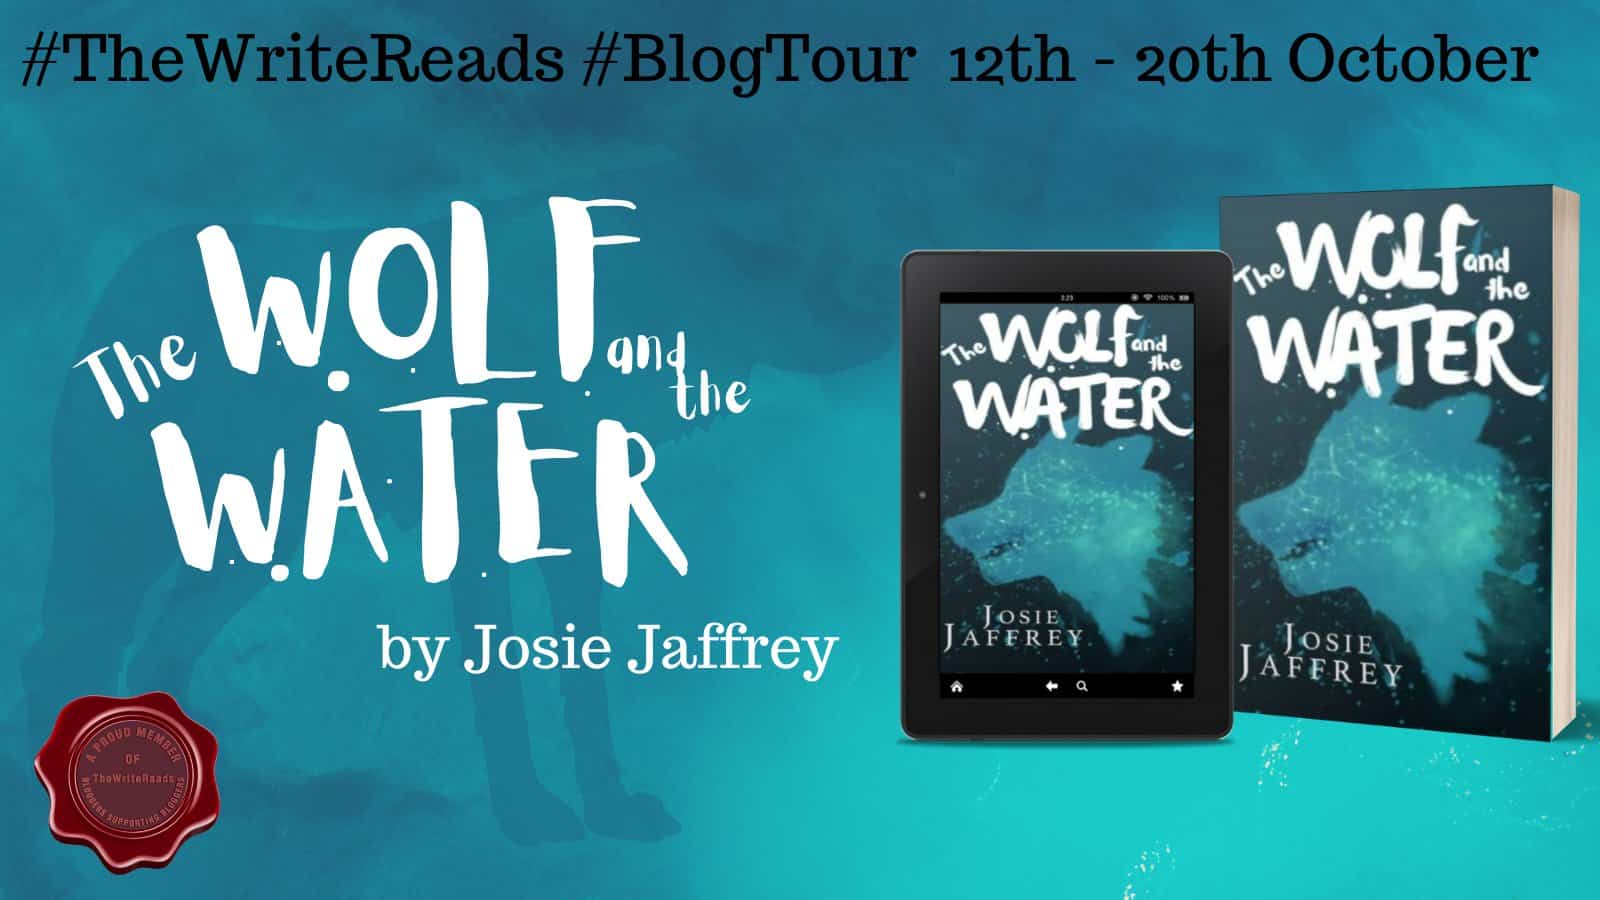 The Wolf and the Water by Josie Jaffrey